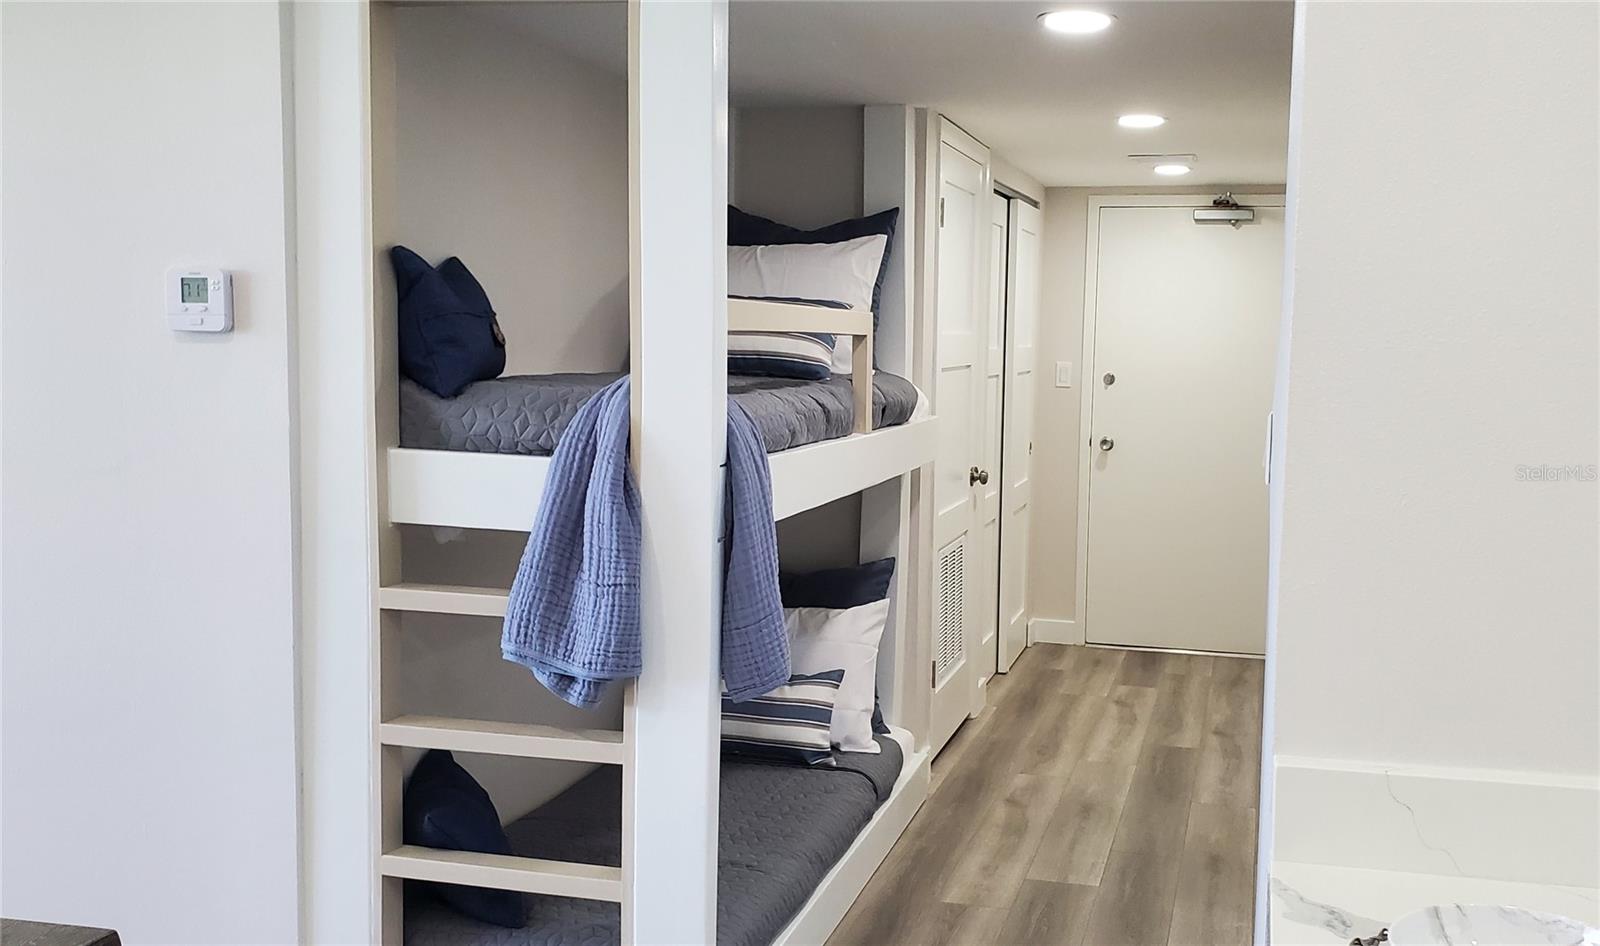 Unique bunkbeds -- ready for extra guests!